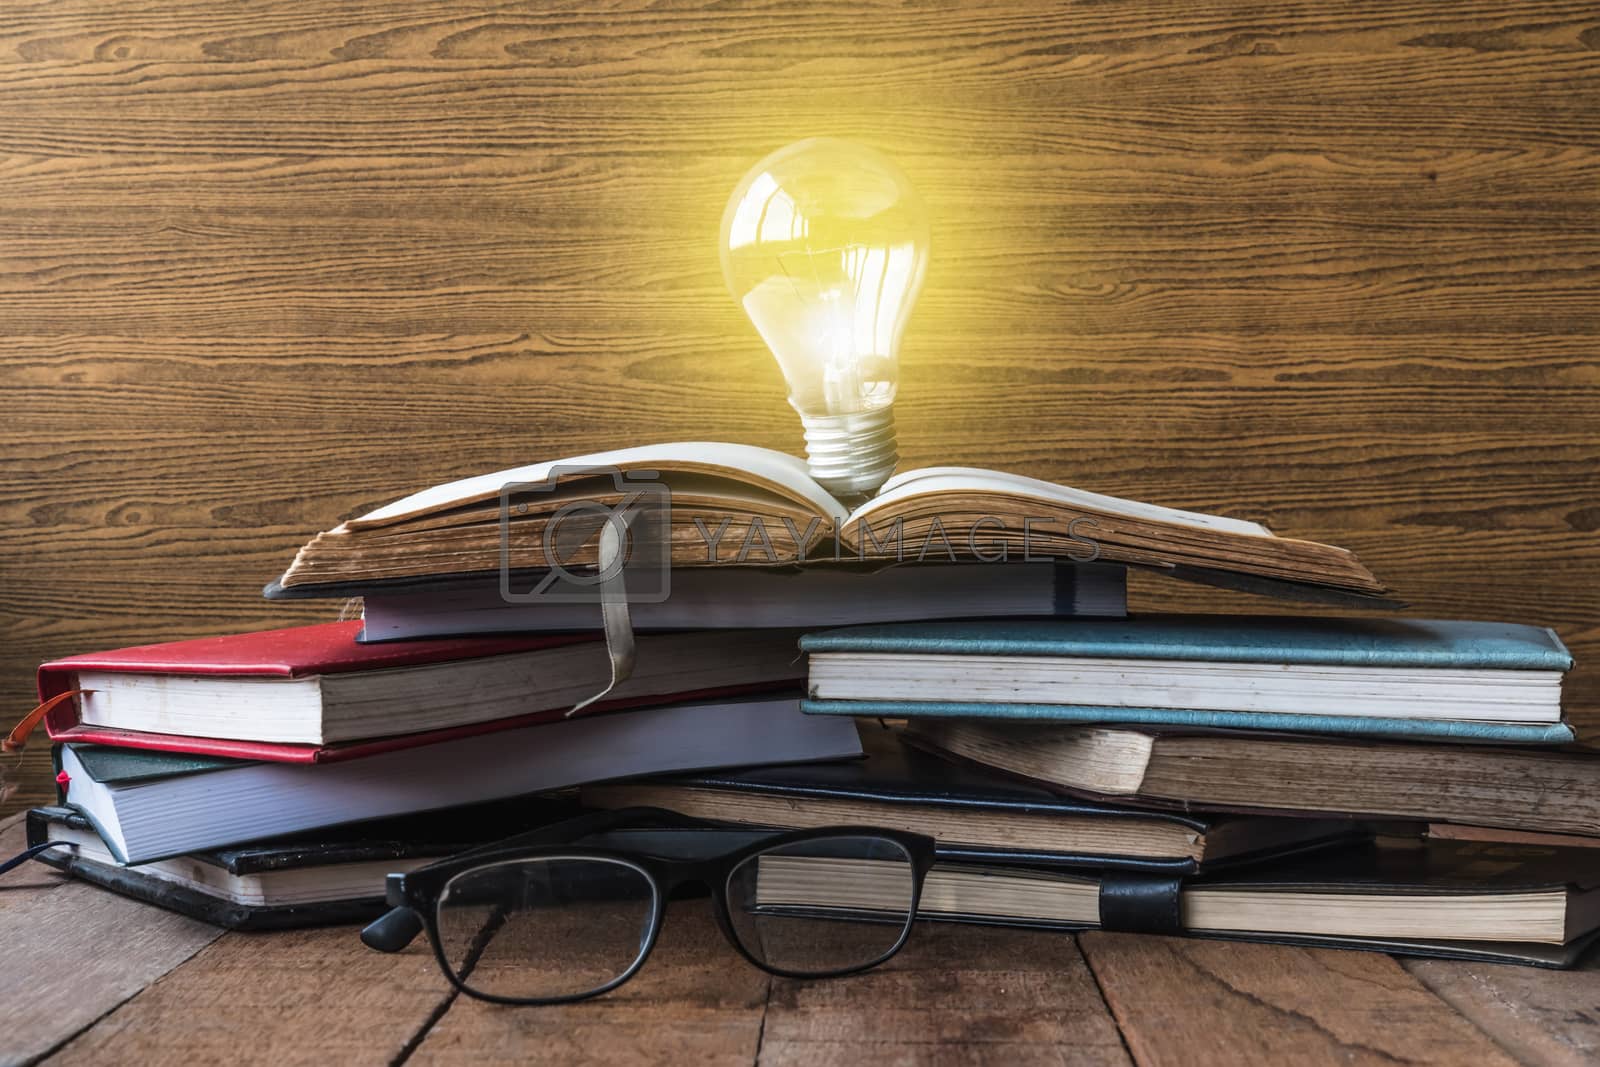 Royalty free image of Open book with light bulb, hardback books and glasses on wooden table. by ronnarong